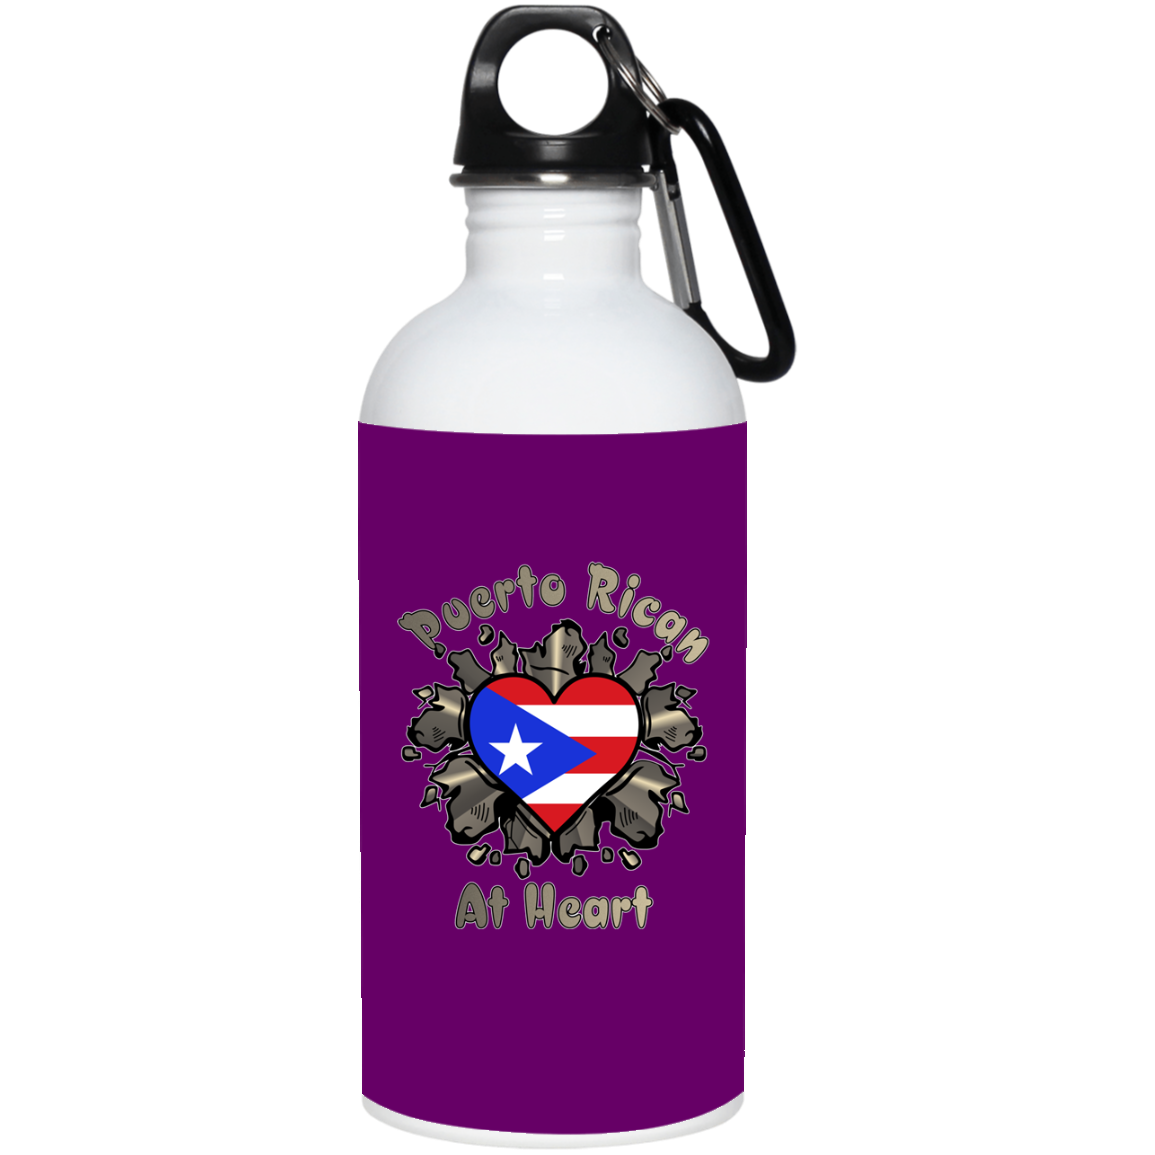 Puerto Rican At Heart - 20 oz. Stainless Steel Water Bottle